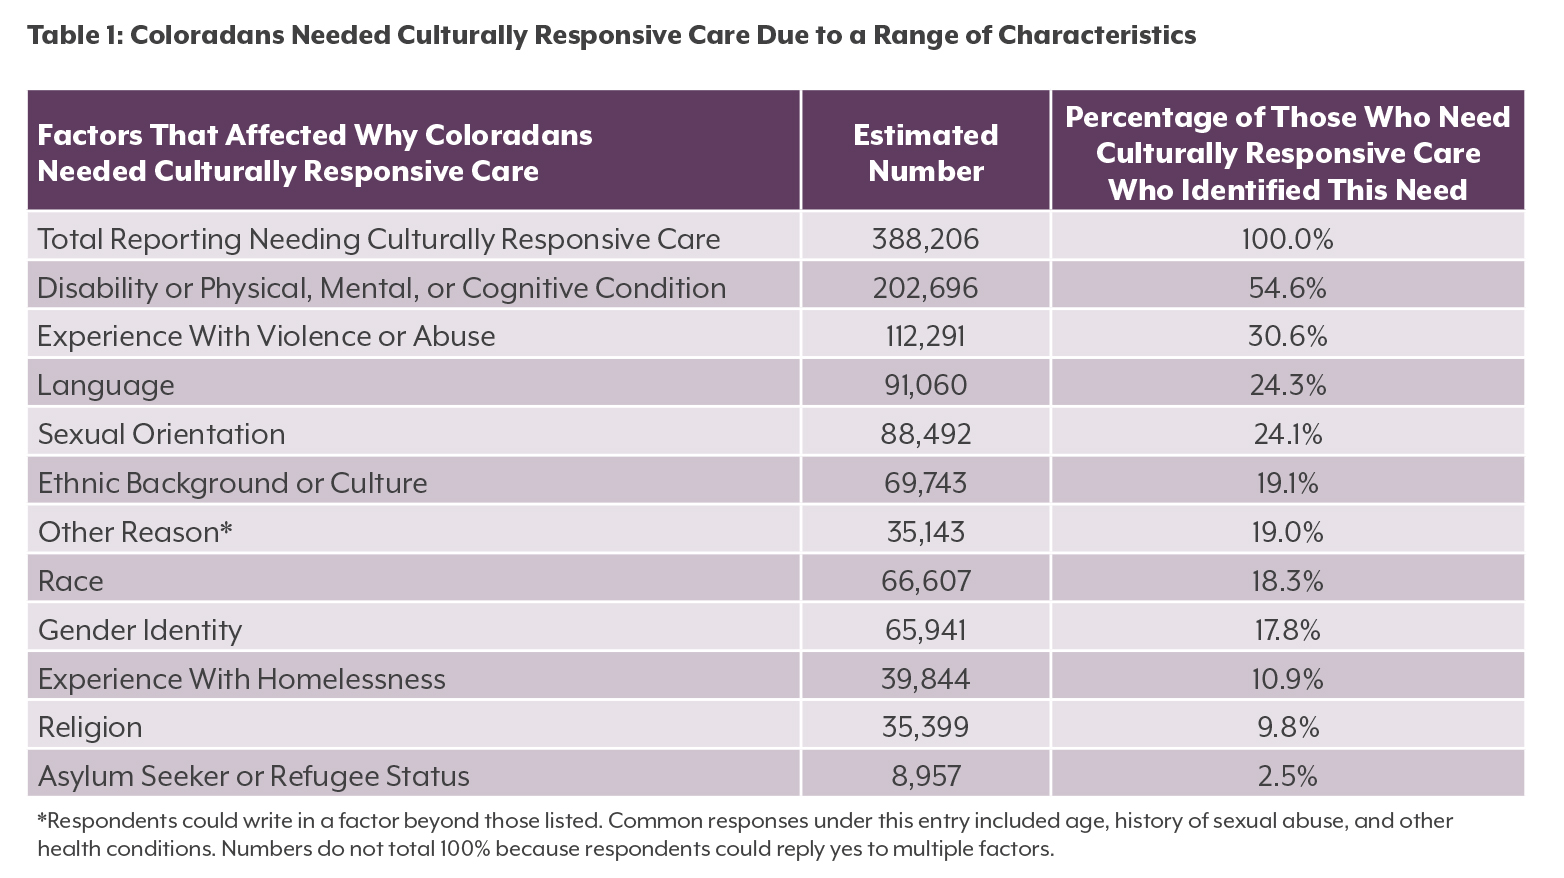 Table 1: Coloradans Needed Culturally Responsive Care Due to a Range of Characteristics